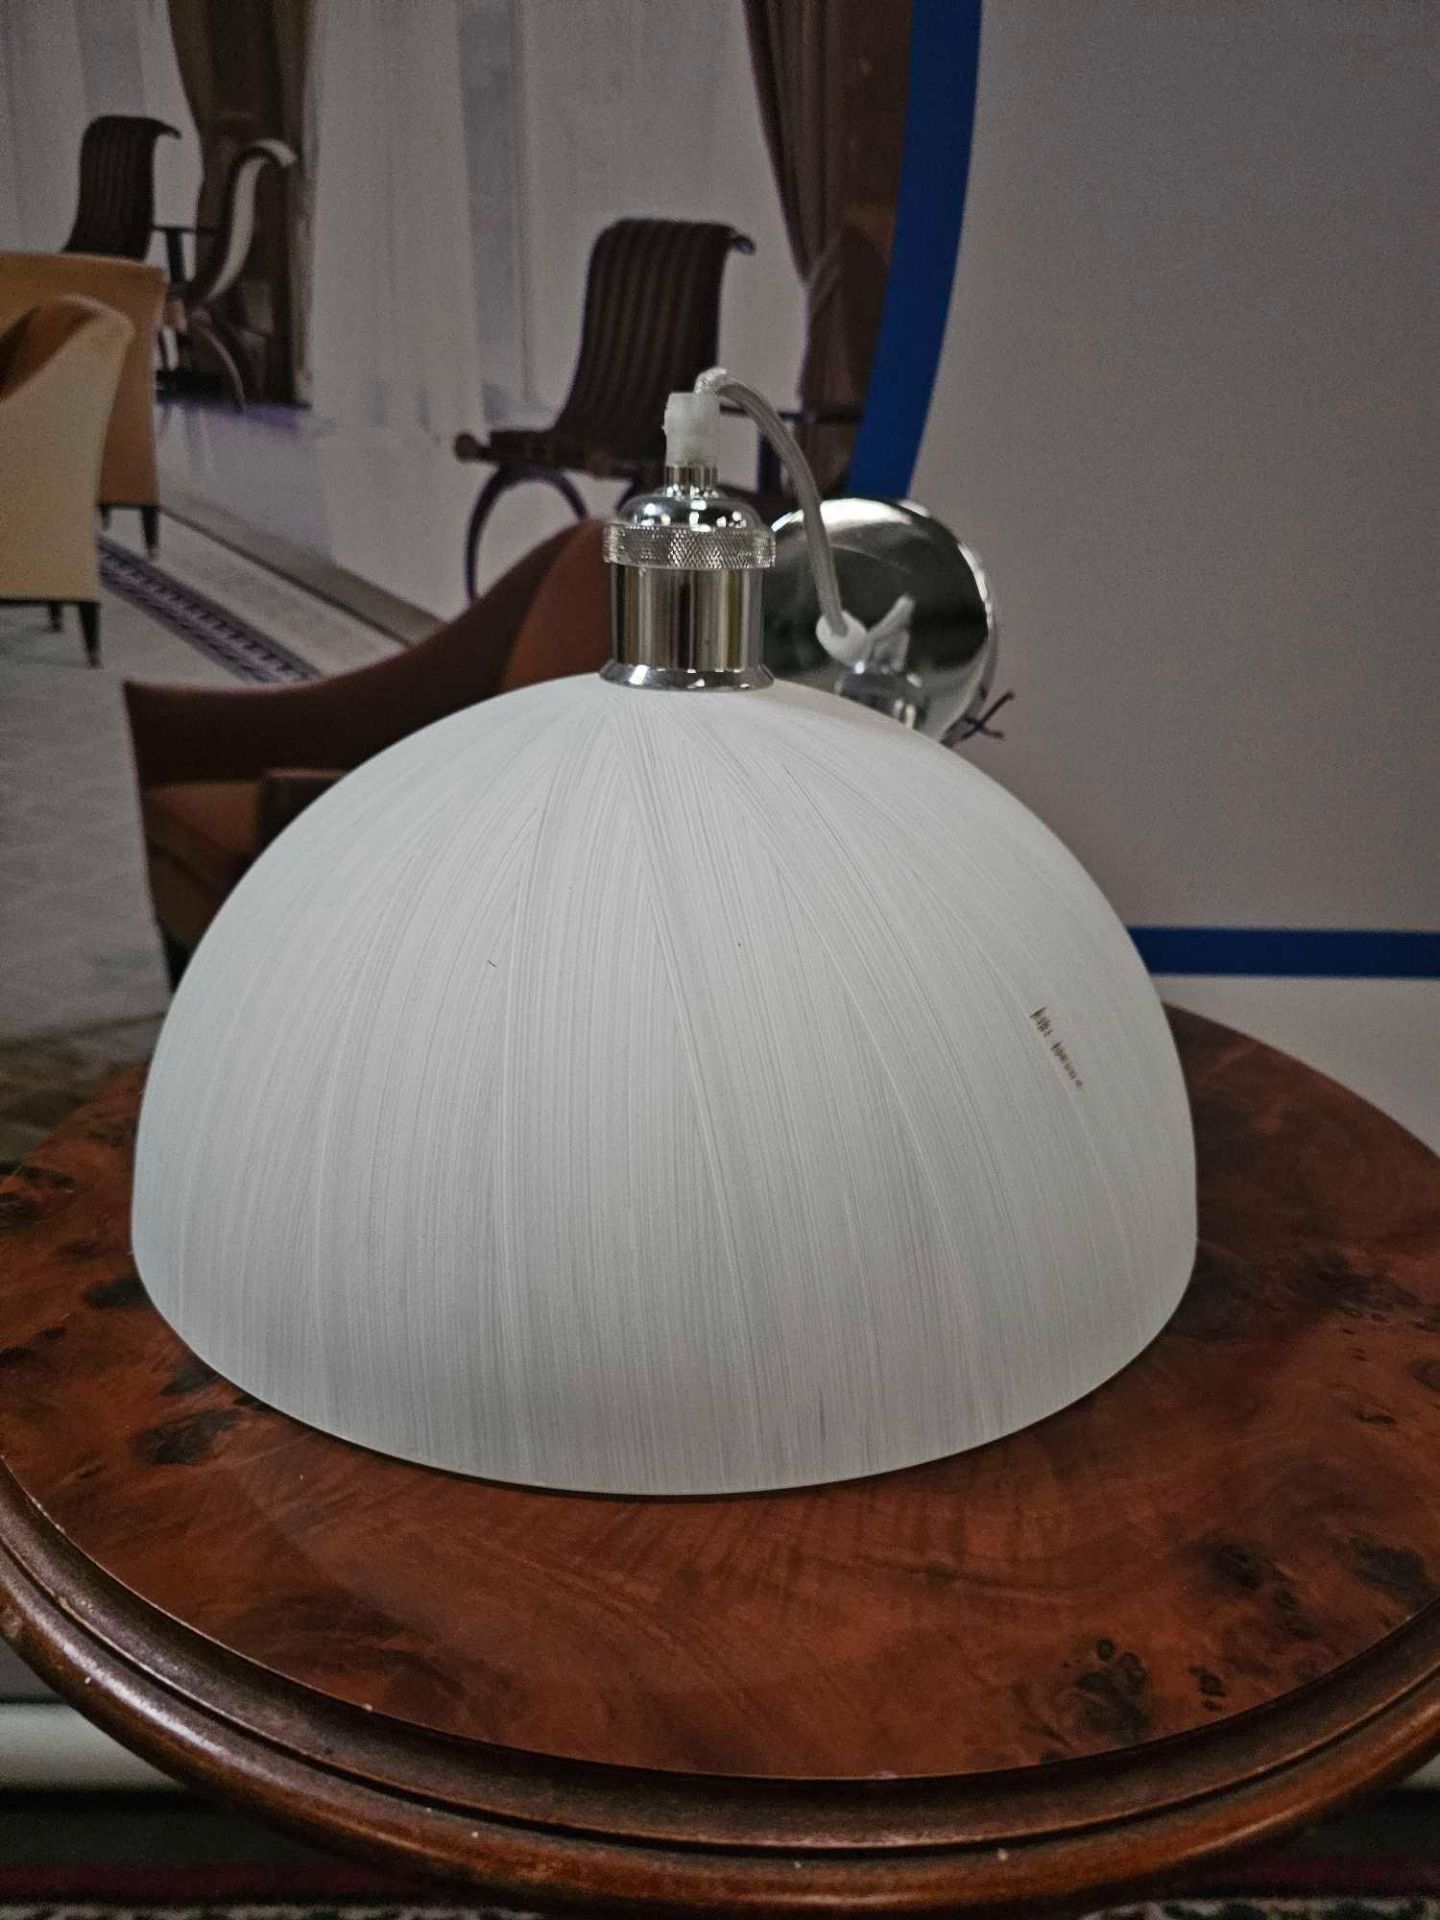 Glass Dome Pendant Light Frosted Opaque Modern Ceiling Lamp Shade Vintage Chrome Lamp Holder M0214 - Image 2 of 3